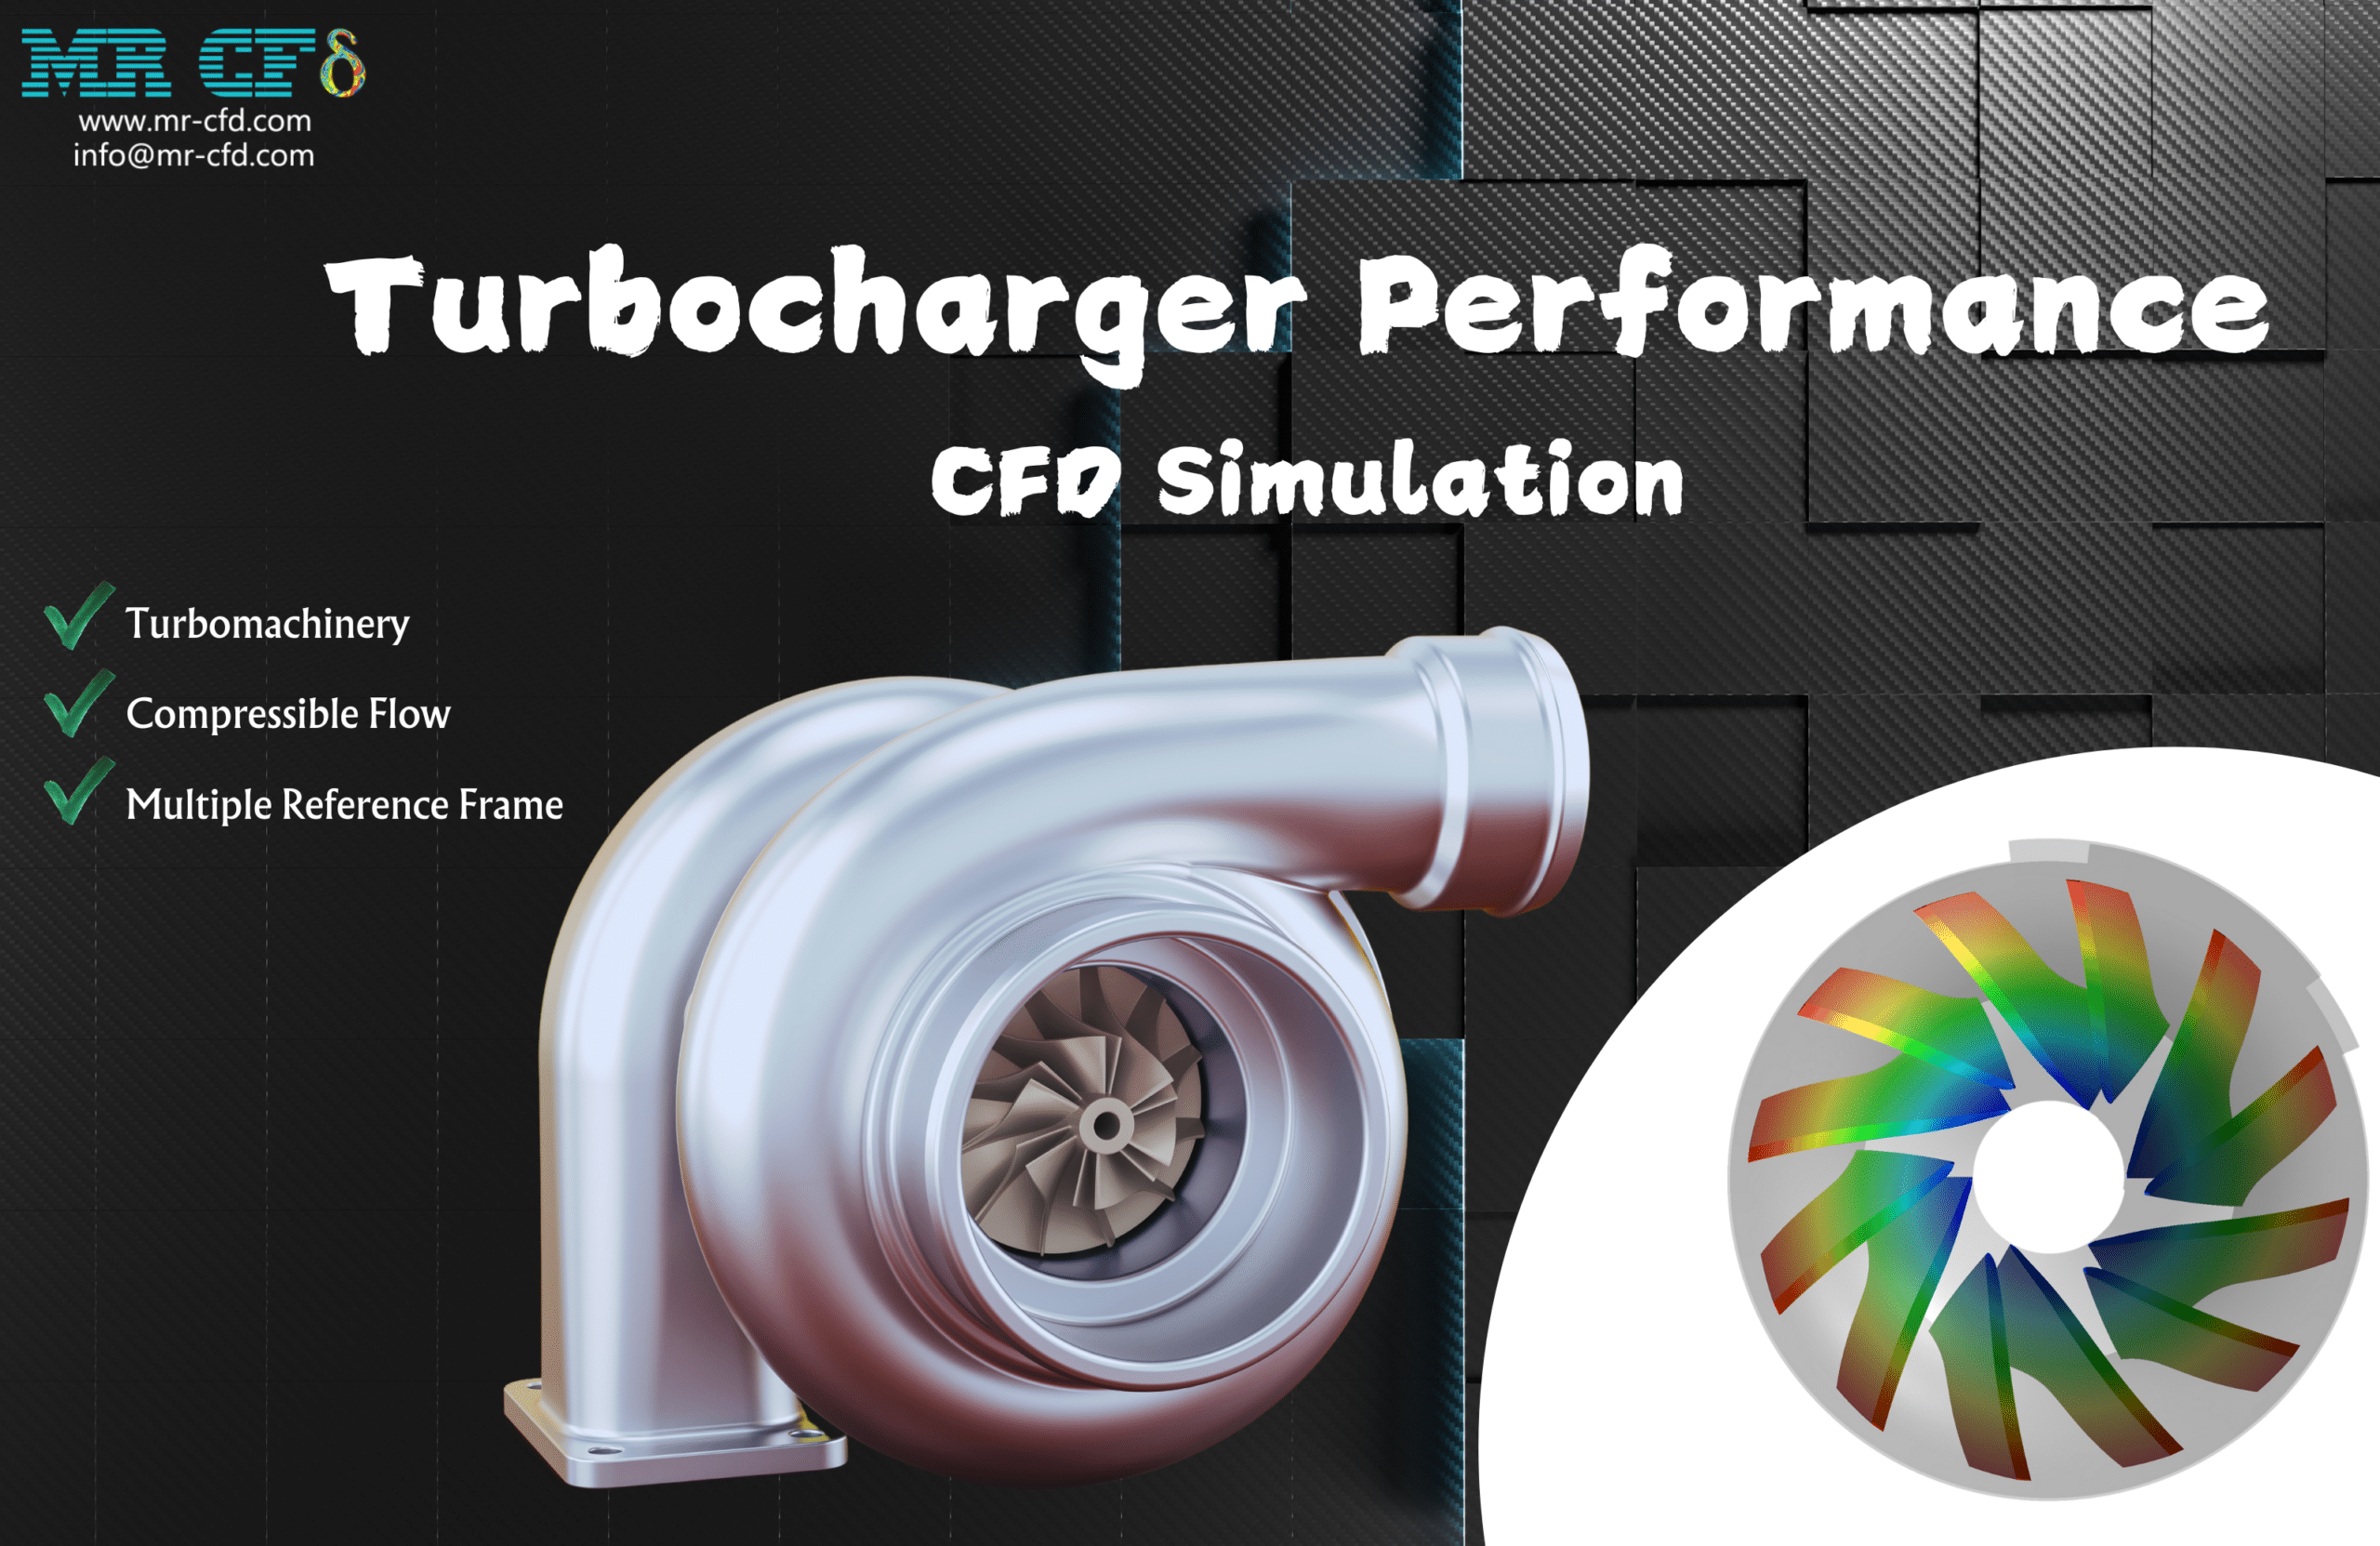 Turbocharger Performance CFD Simulation, ANSYS Fluent Training